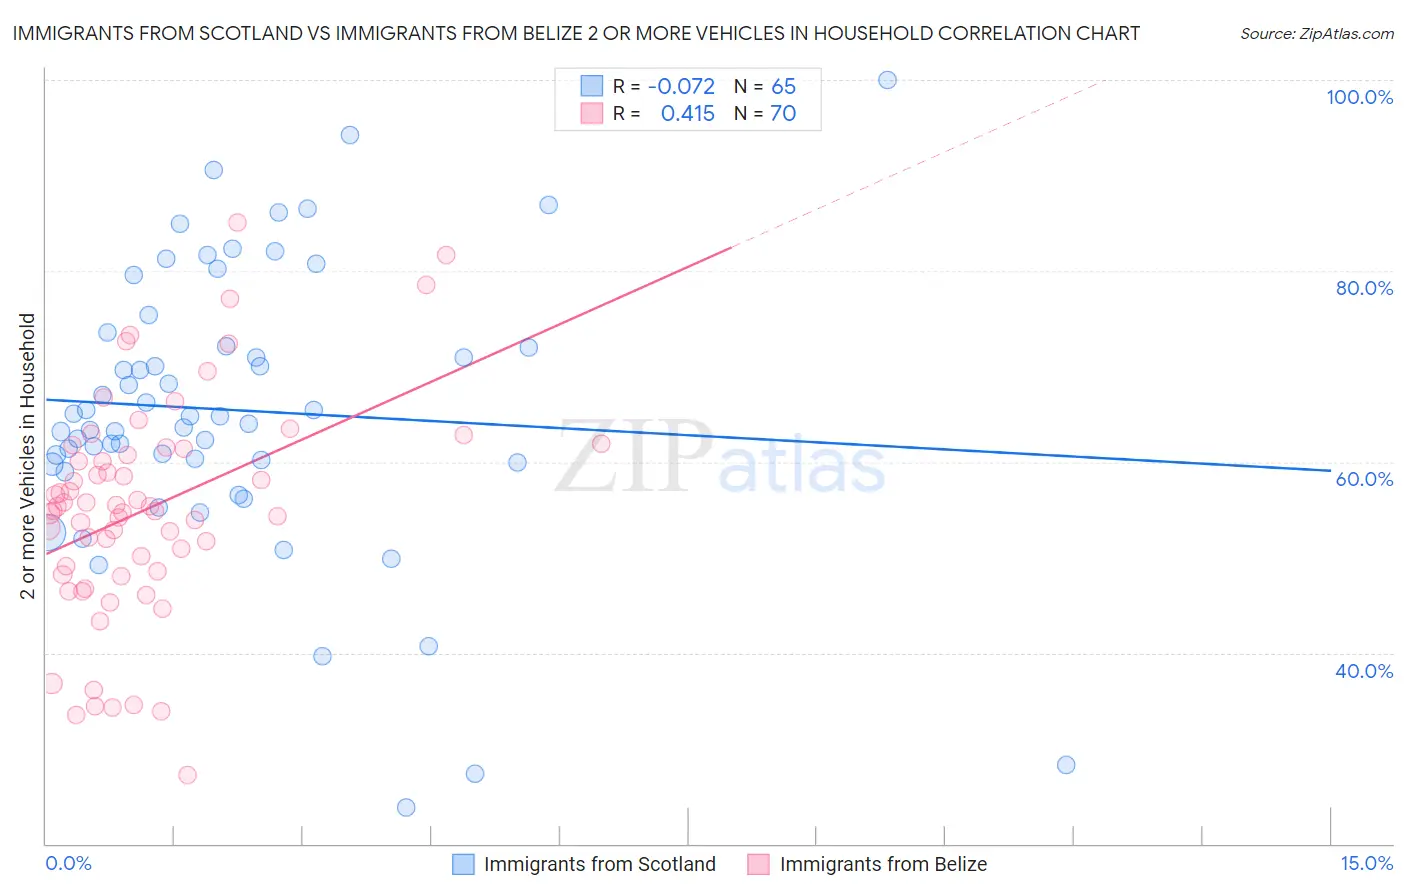 Immigrants from Scotland vs Immigrants from Belize 2 or more Vehicles in Household